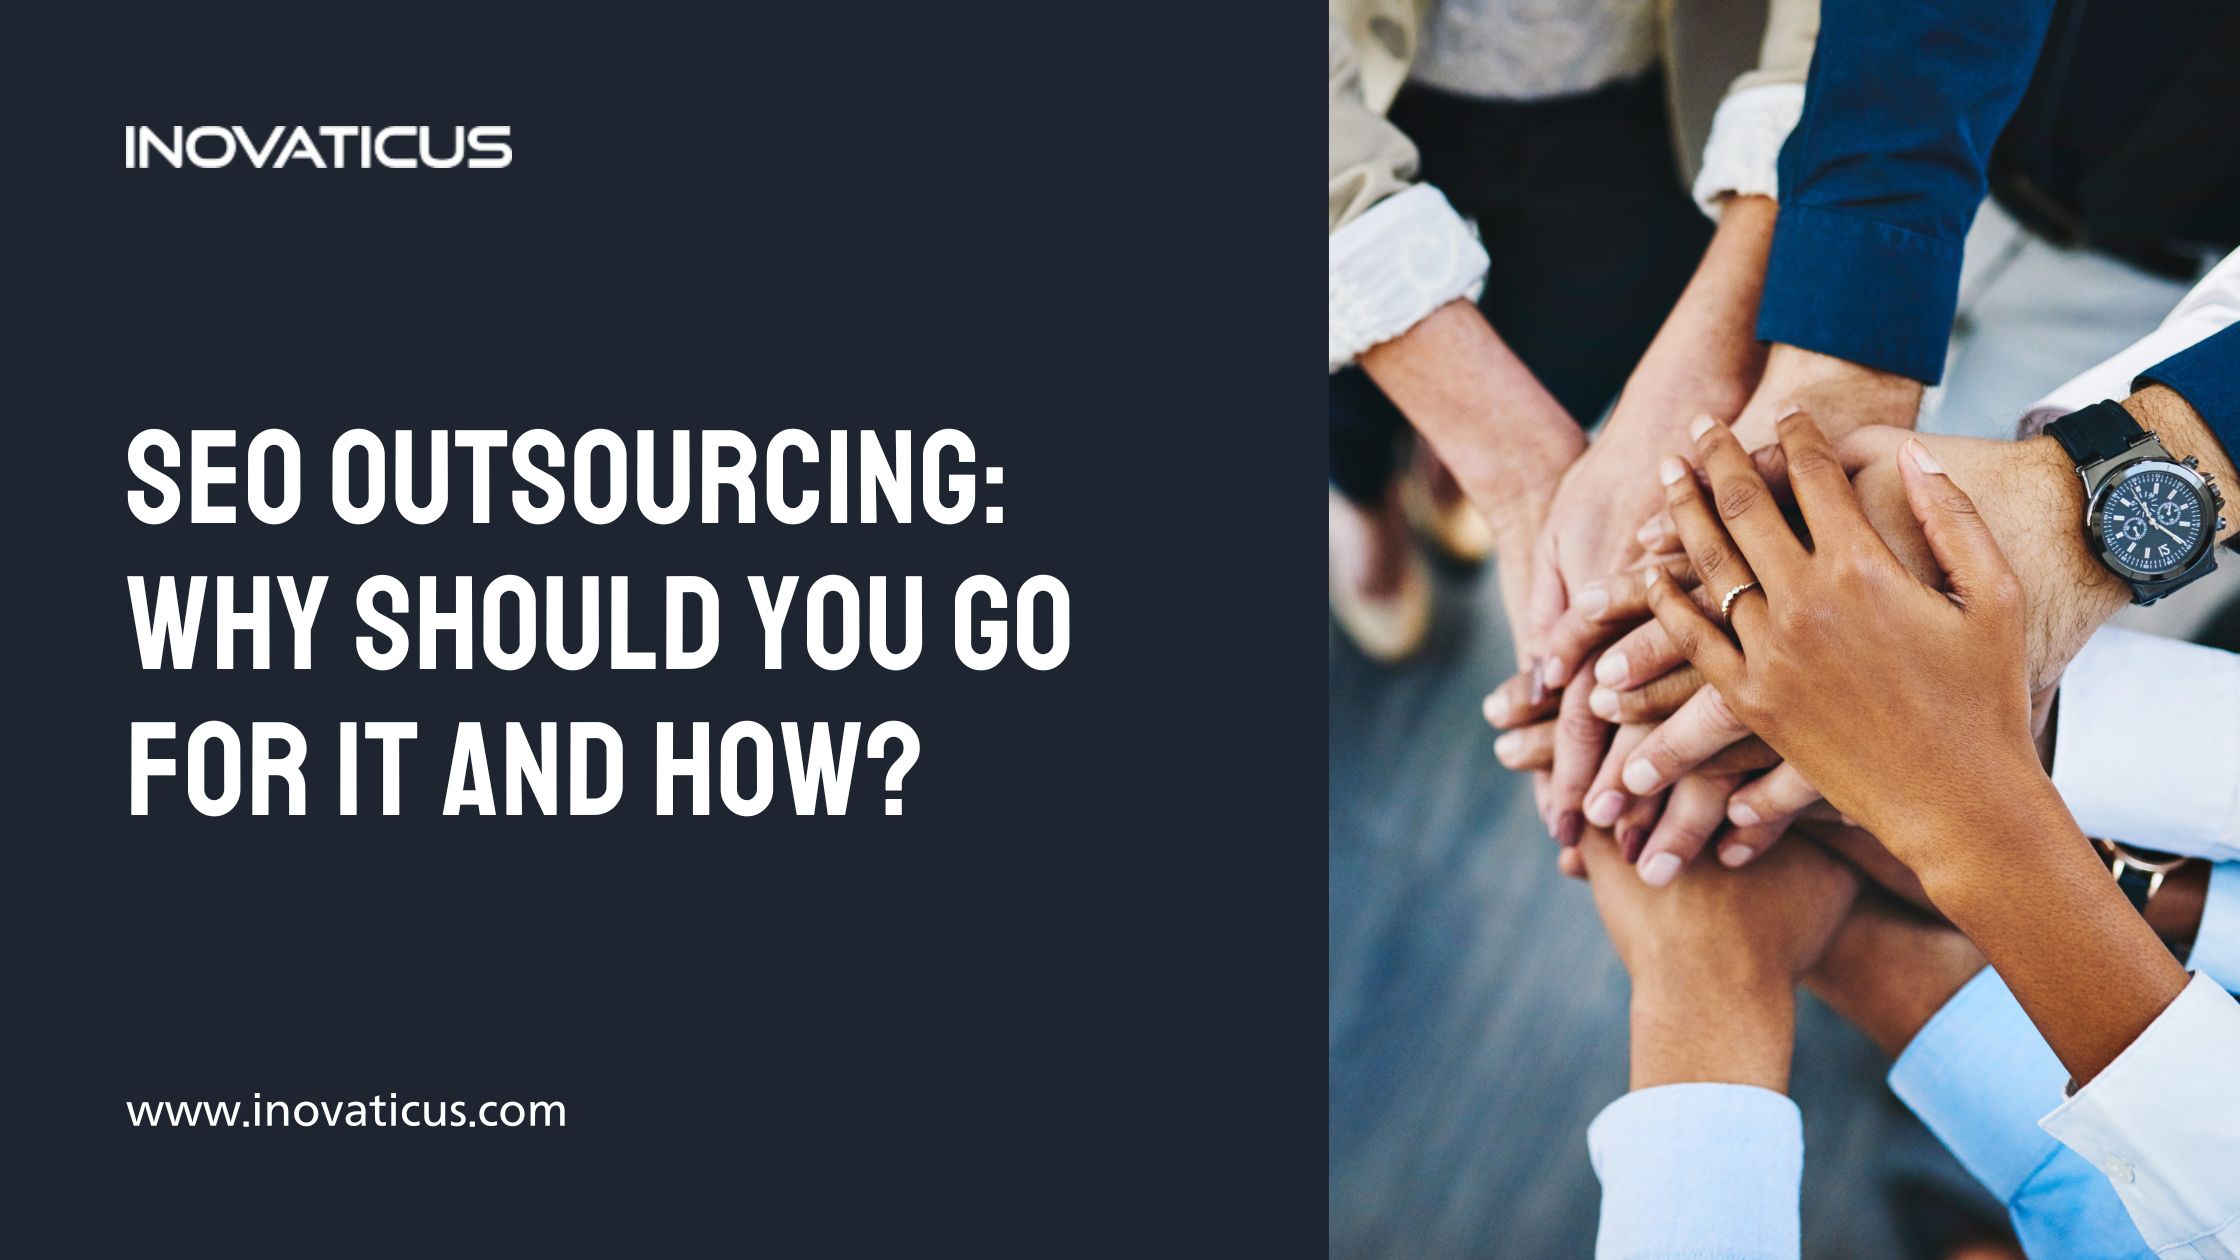 SEO Outsourcing: Why Should You Go For It And How?